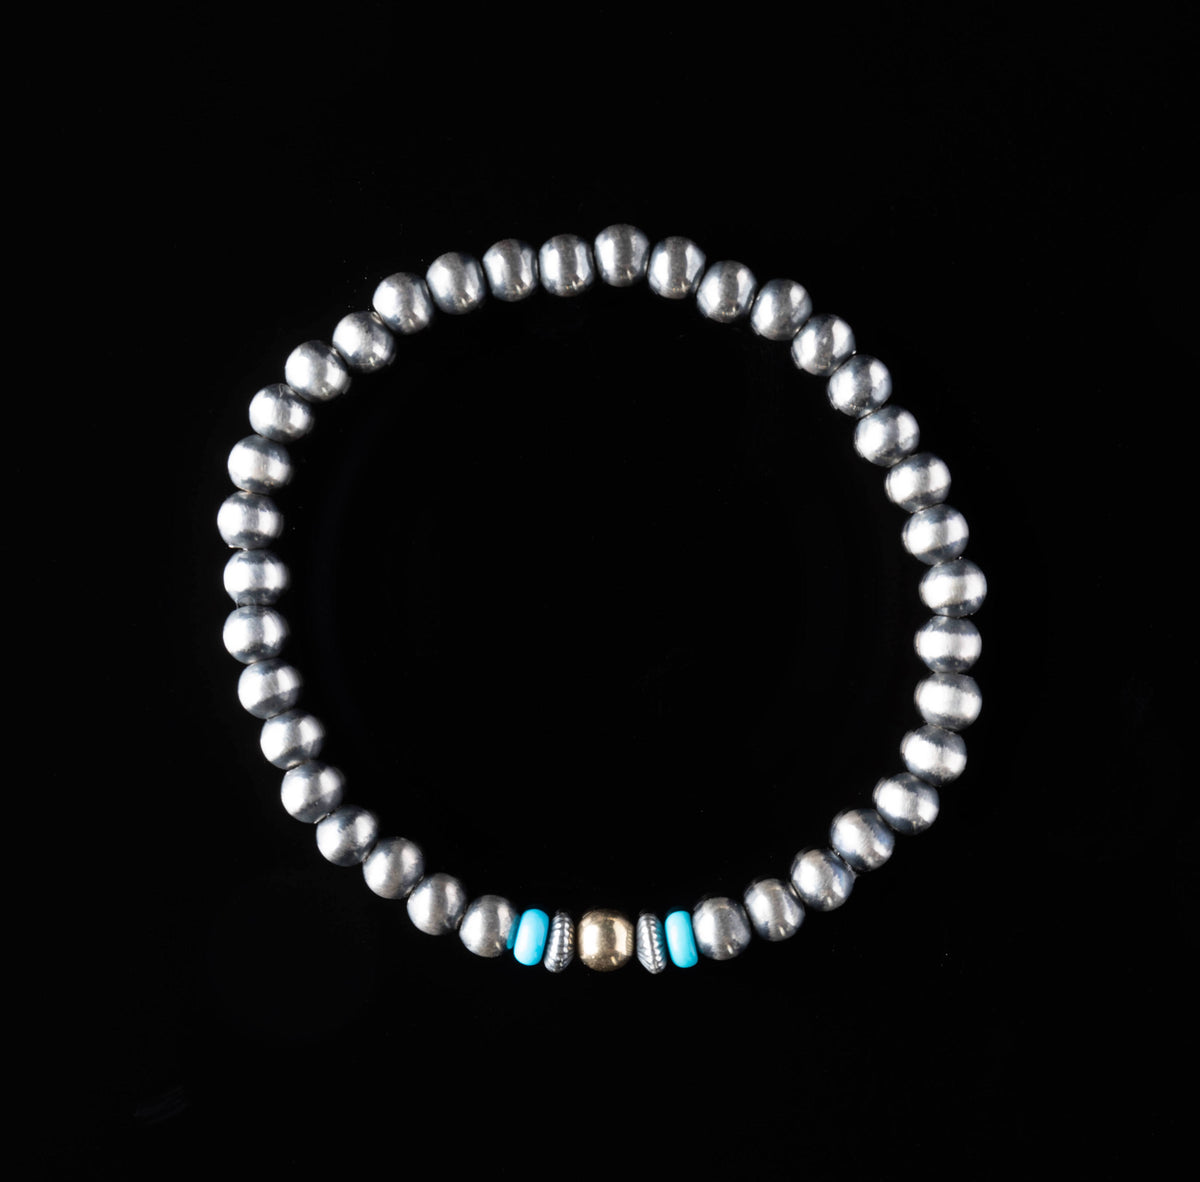 Santa Fe Pearl Stretchy Bracelet - 5 mm with Turquoise and 14k Gold Bead